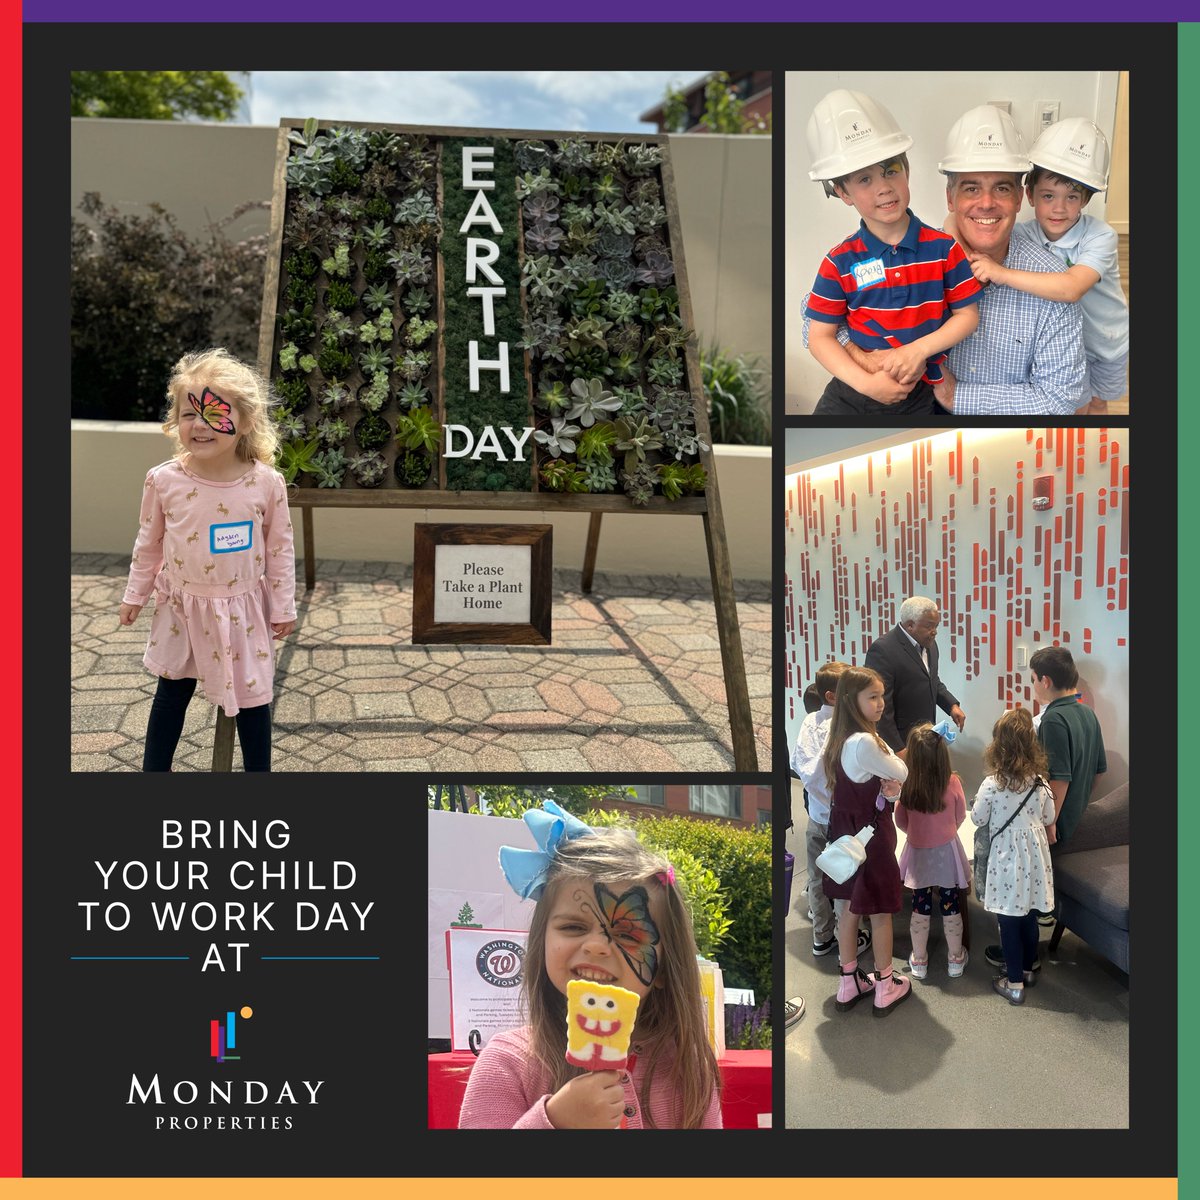 It was a day packed full of education and fun at our Bring Your Child to Work Day 2024 event.

Thank you to all our partners: @Oasis_Plants, Green Street Gardens, Red Coats Cleaning Services, @alveolebuzz, @Admiralinfo, and Elevator Control Service.

#TakeYourChildtoWorkDay